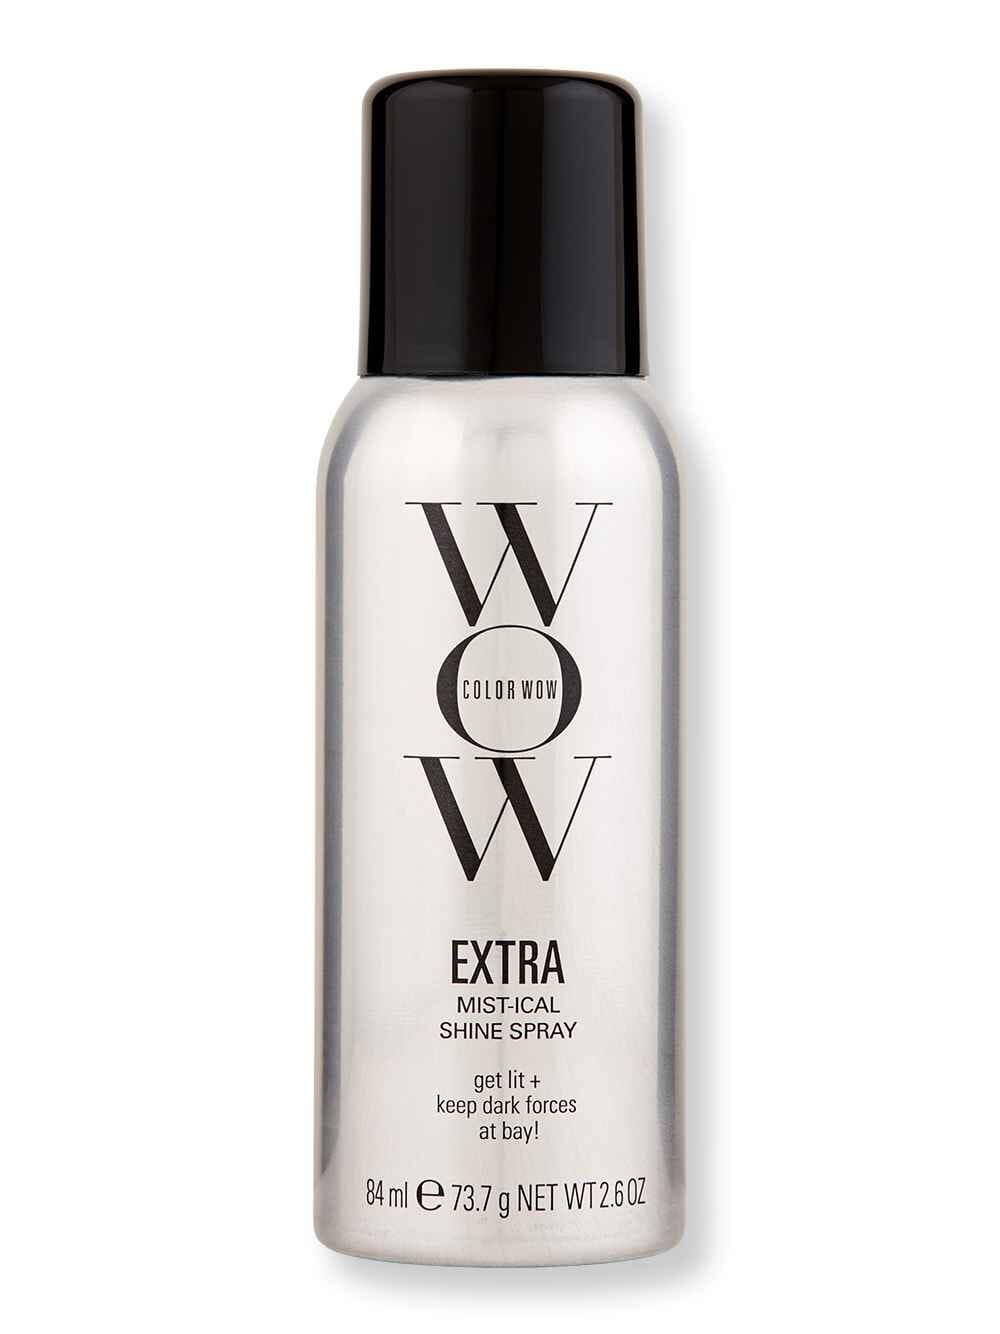 Color Wow Color Wow Extra Mist-ical Shine Spray 2.5 oz Styling Treatments 